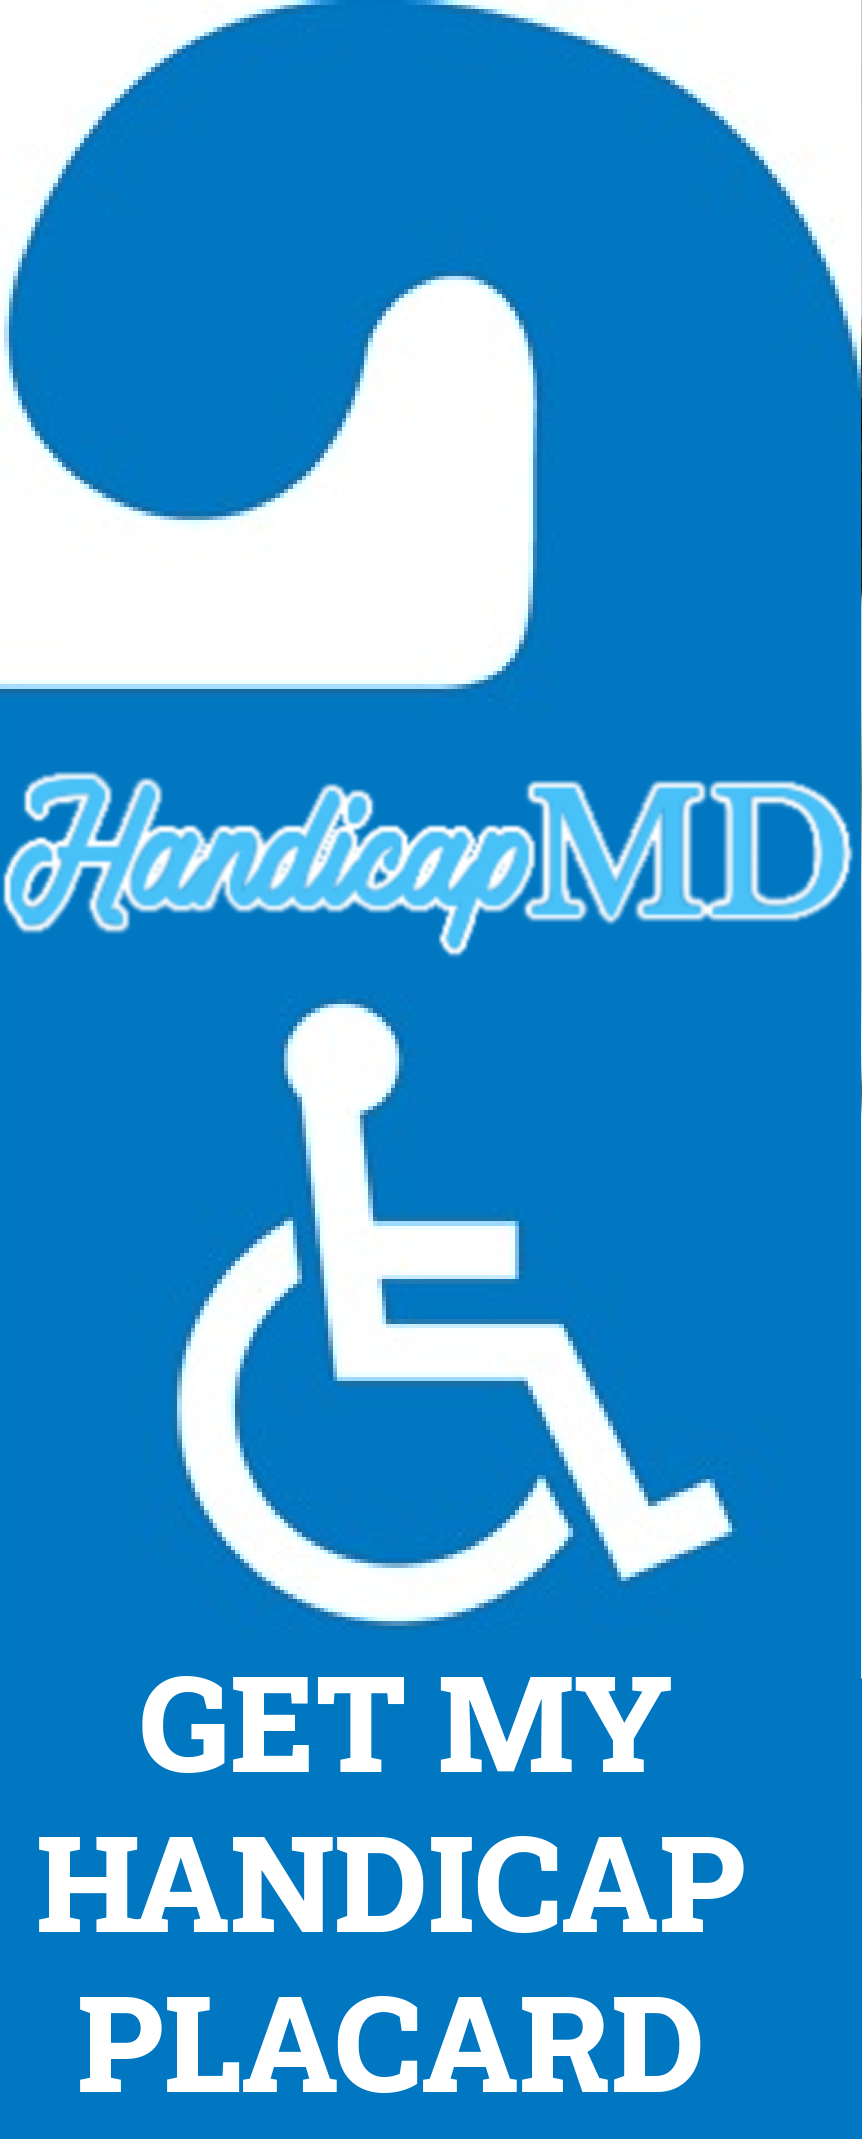 Neurological Disorders: Qualifying Conditions for a DMV Handicap Parking Permit